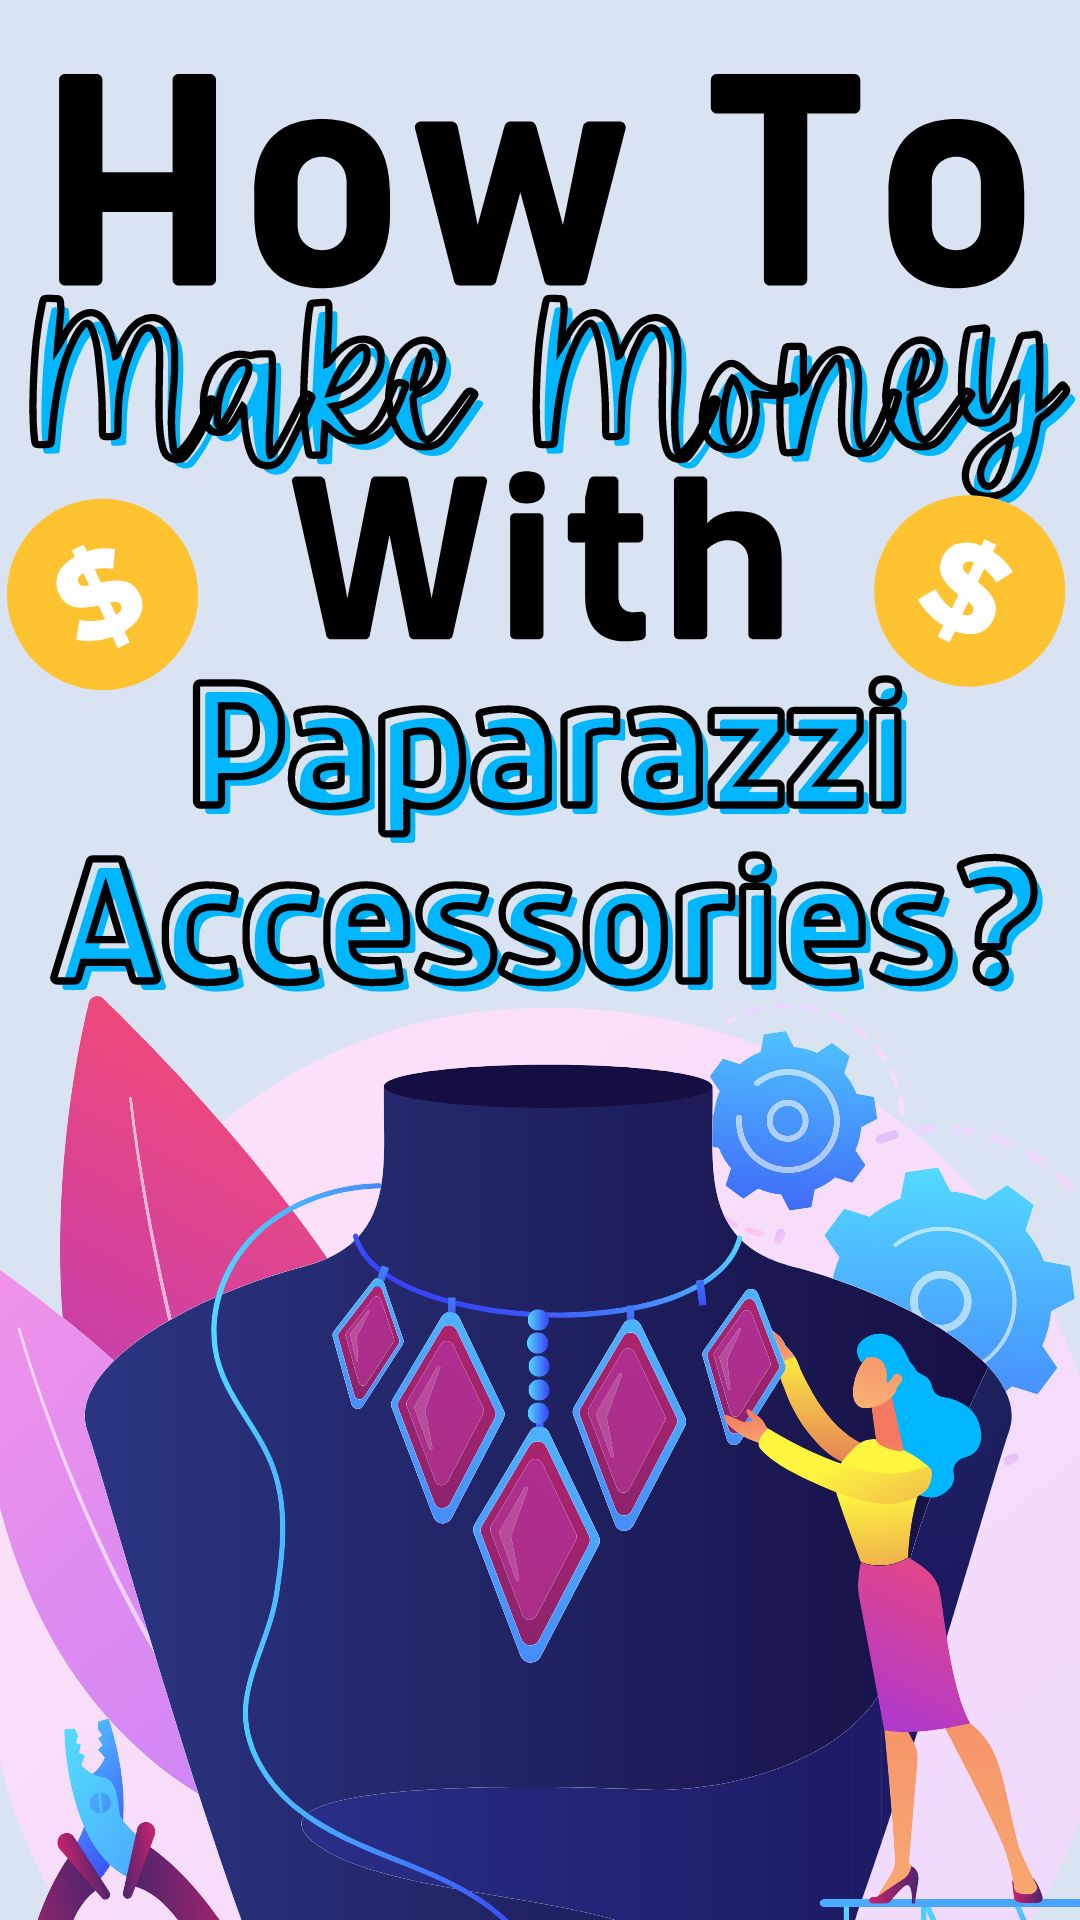 Is Paparazzi Accessories A Scam?